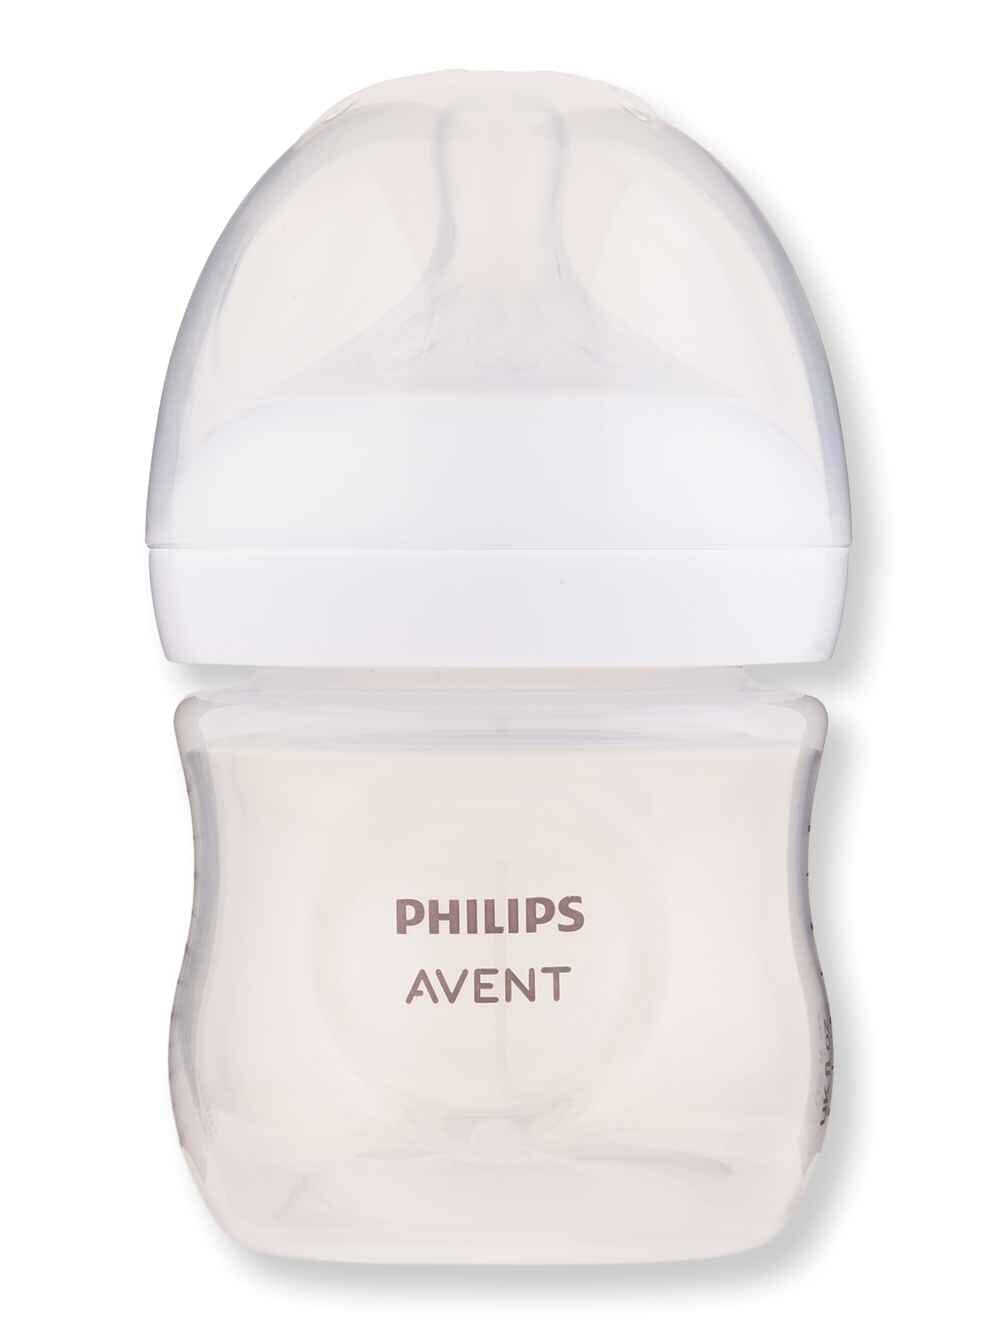 Philips Avent Philips Avent Natural Baby Bottle With Natural Response Nipple Clear 4 oz Baby Bottles 